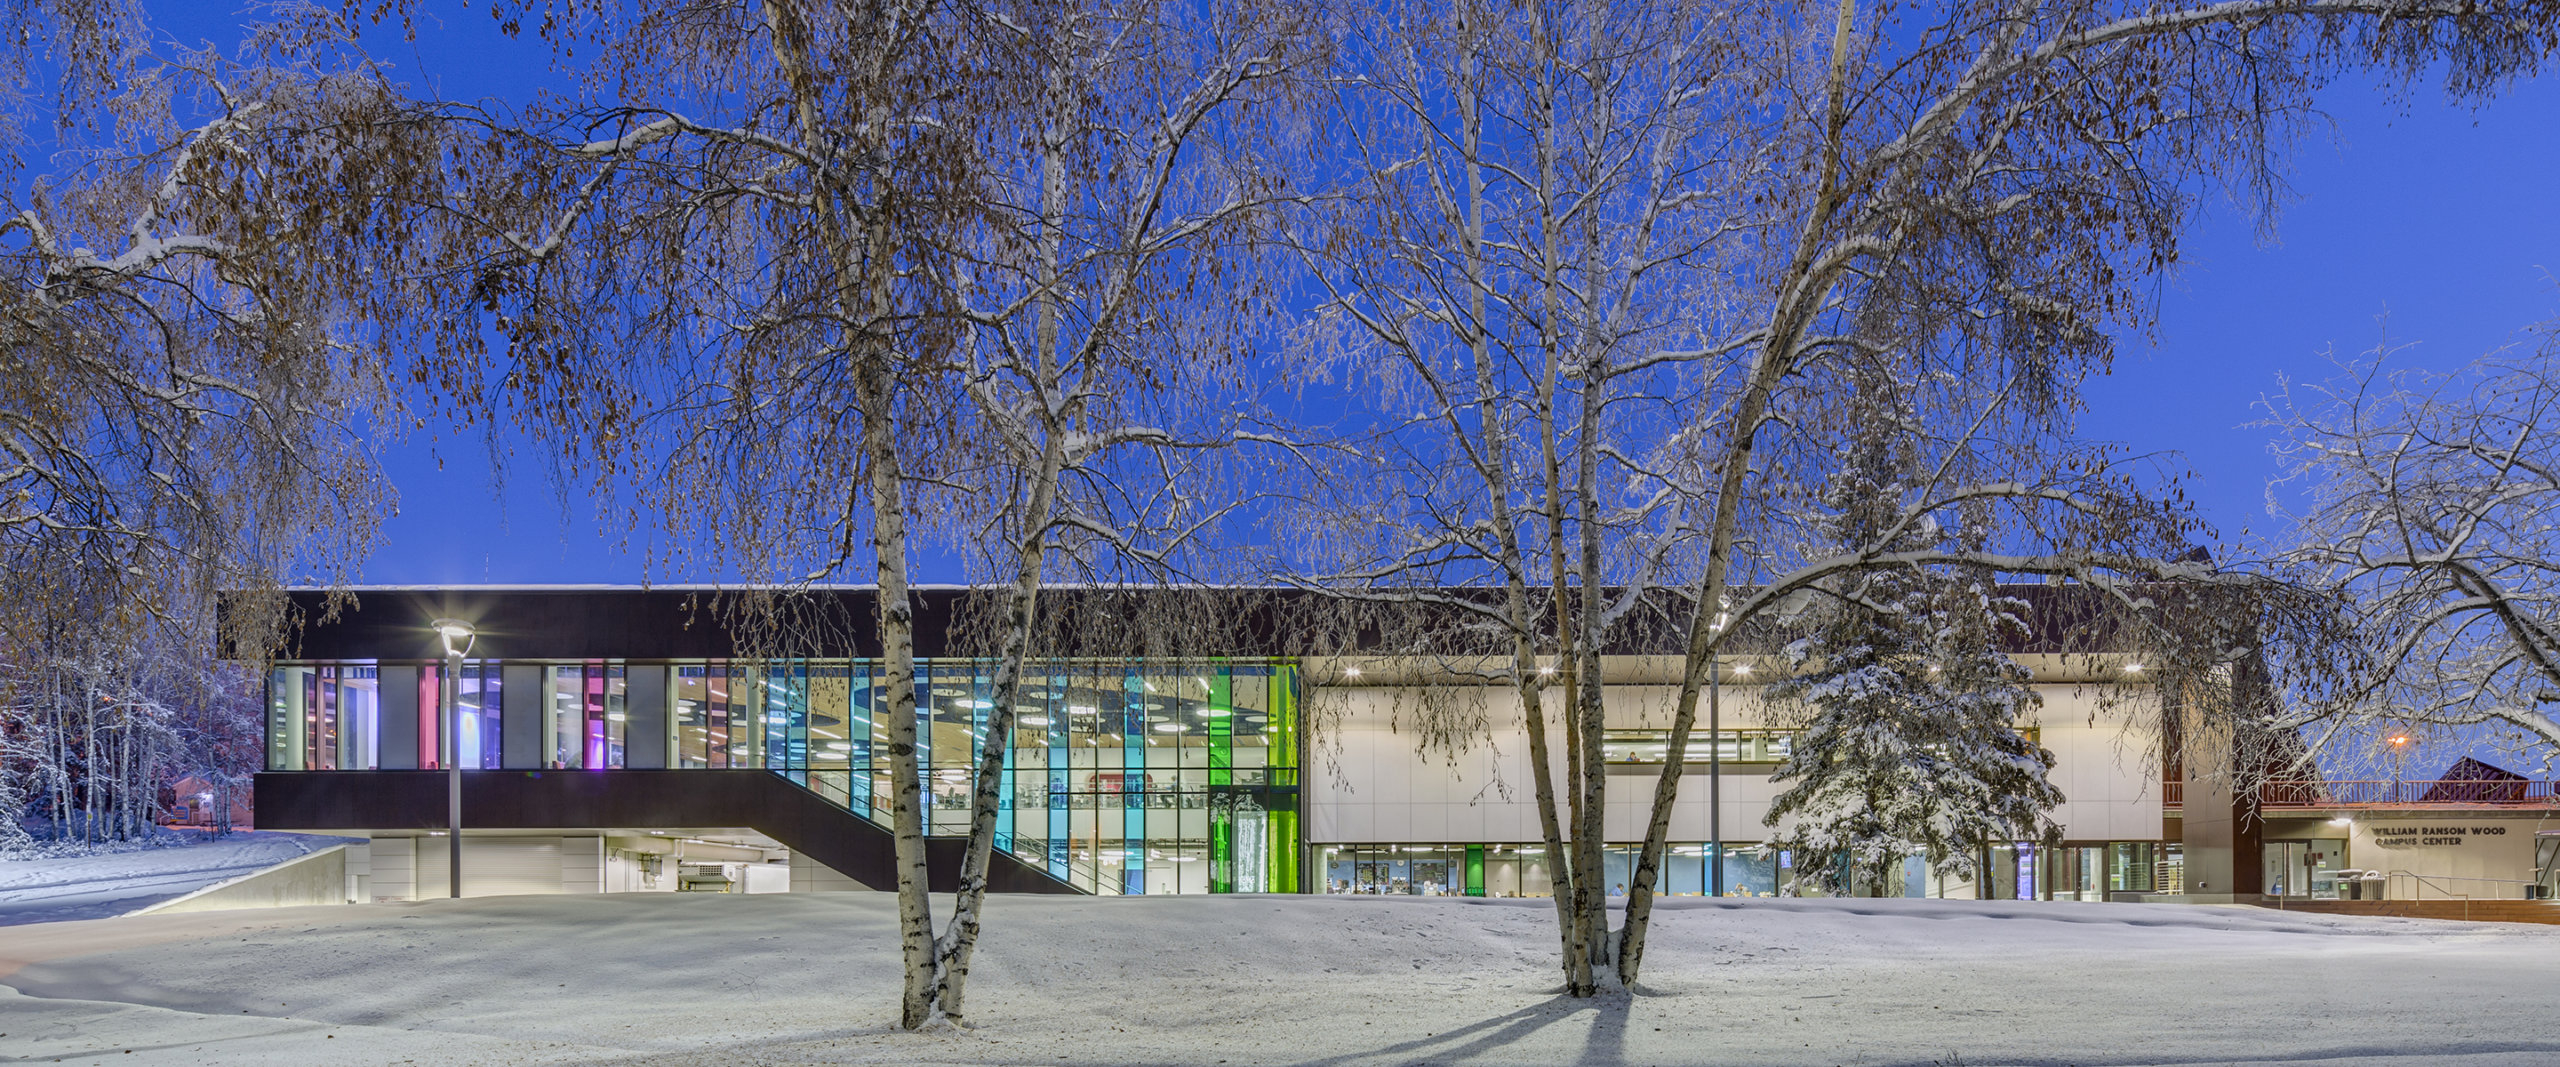 University of Alaska Fairbanks Wood Center at dusk with snow on the ground and trees